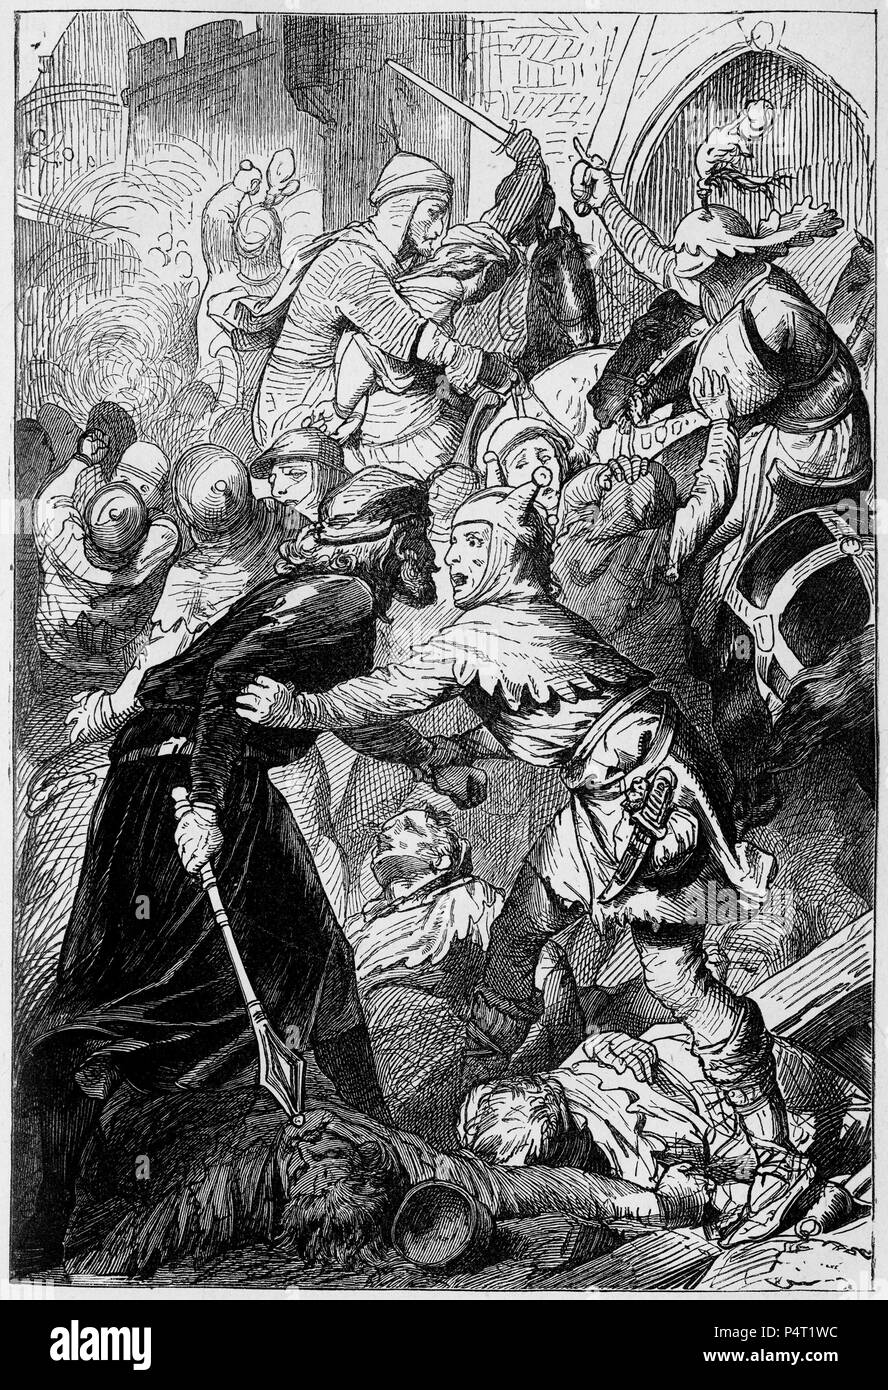 Engraving of soldiers in a medieval battle scene. From an illustrated copy of Ivanhoe, 1878. Stock Photo